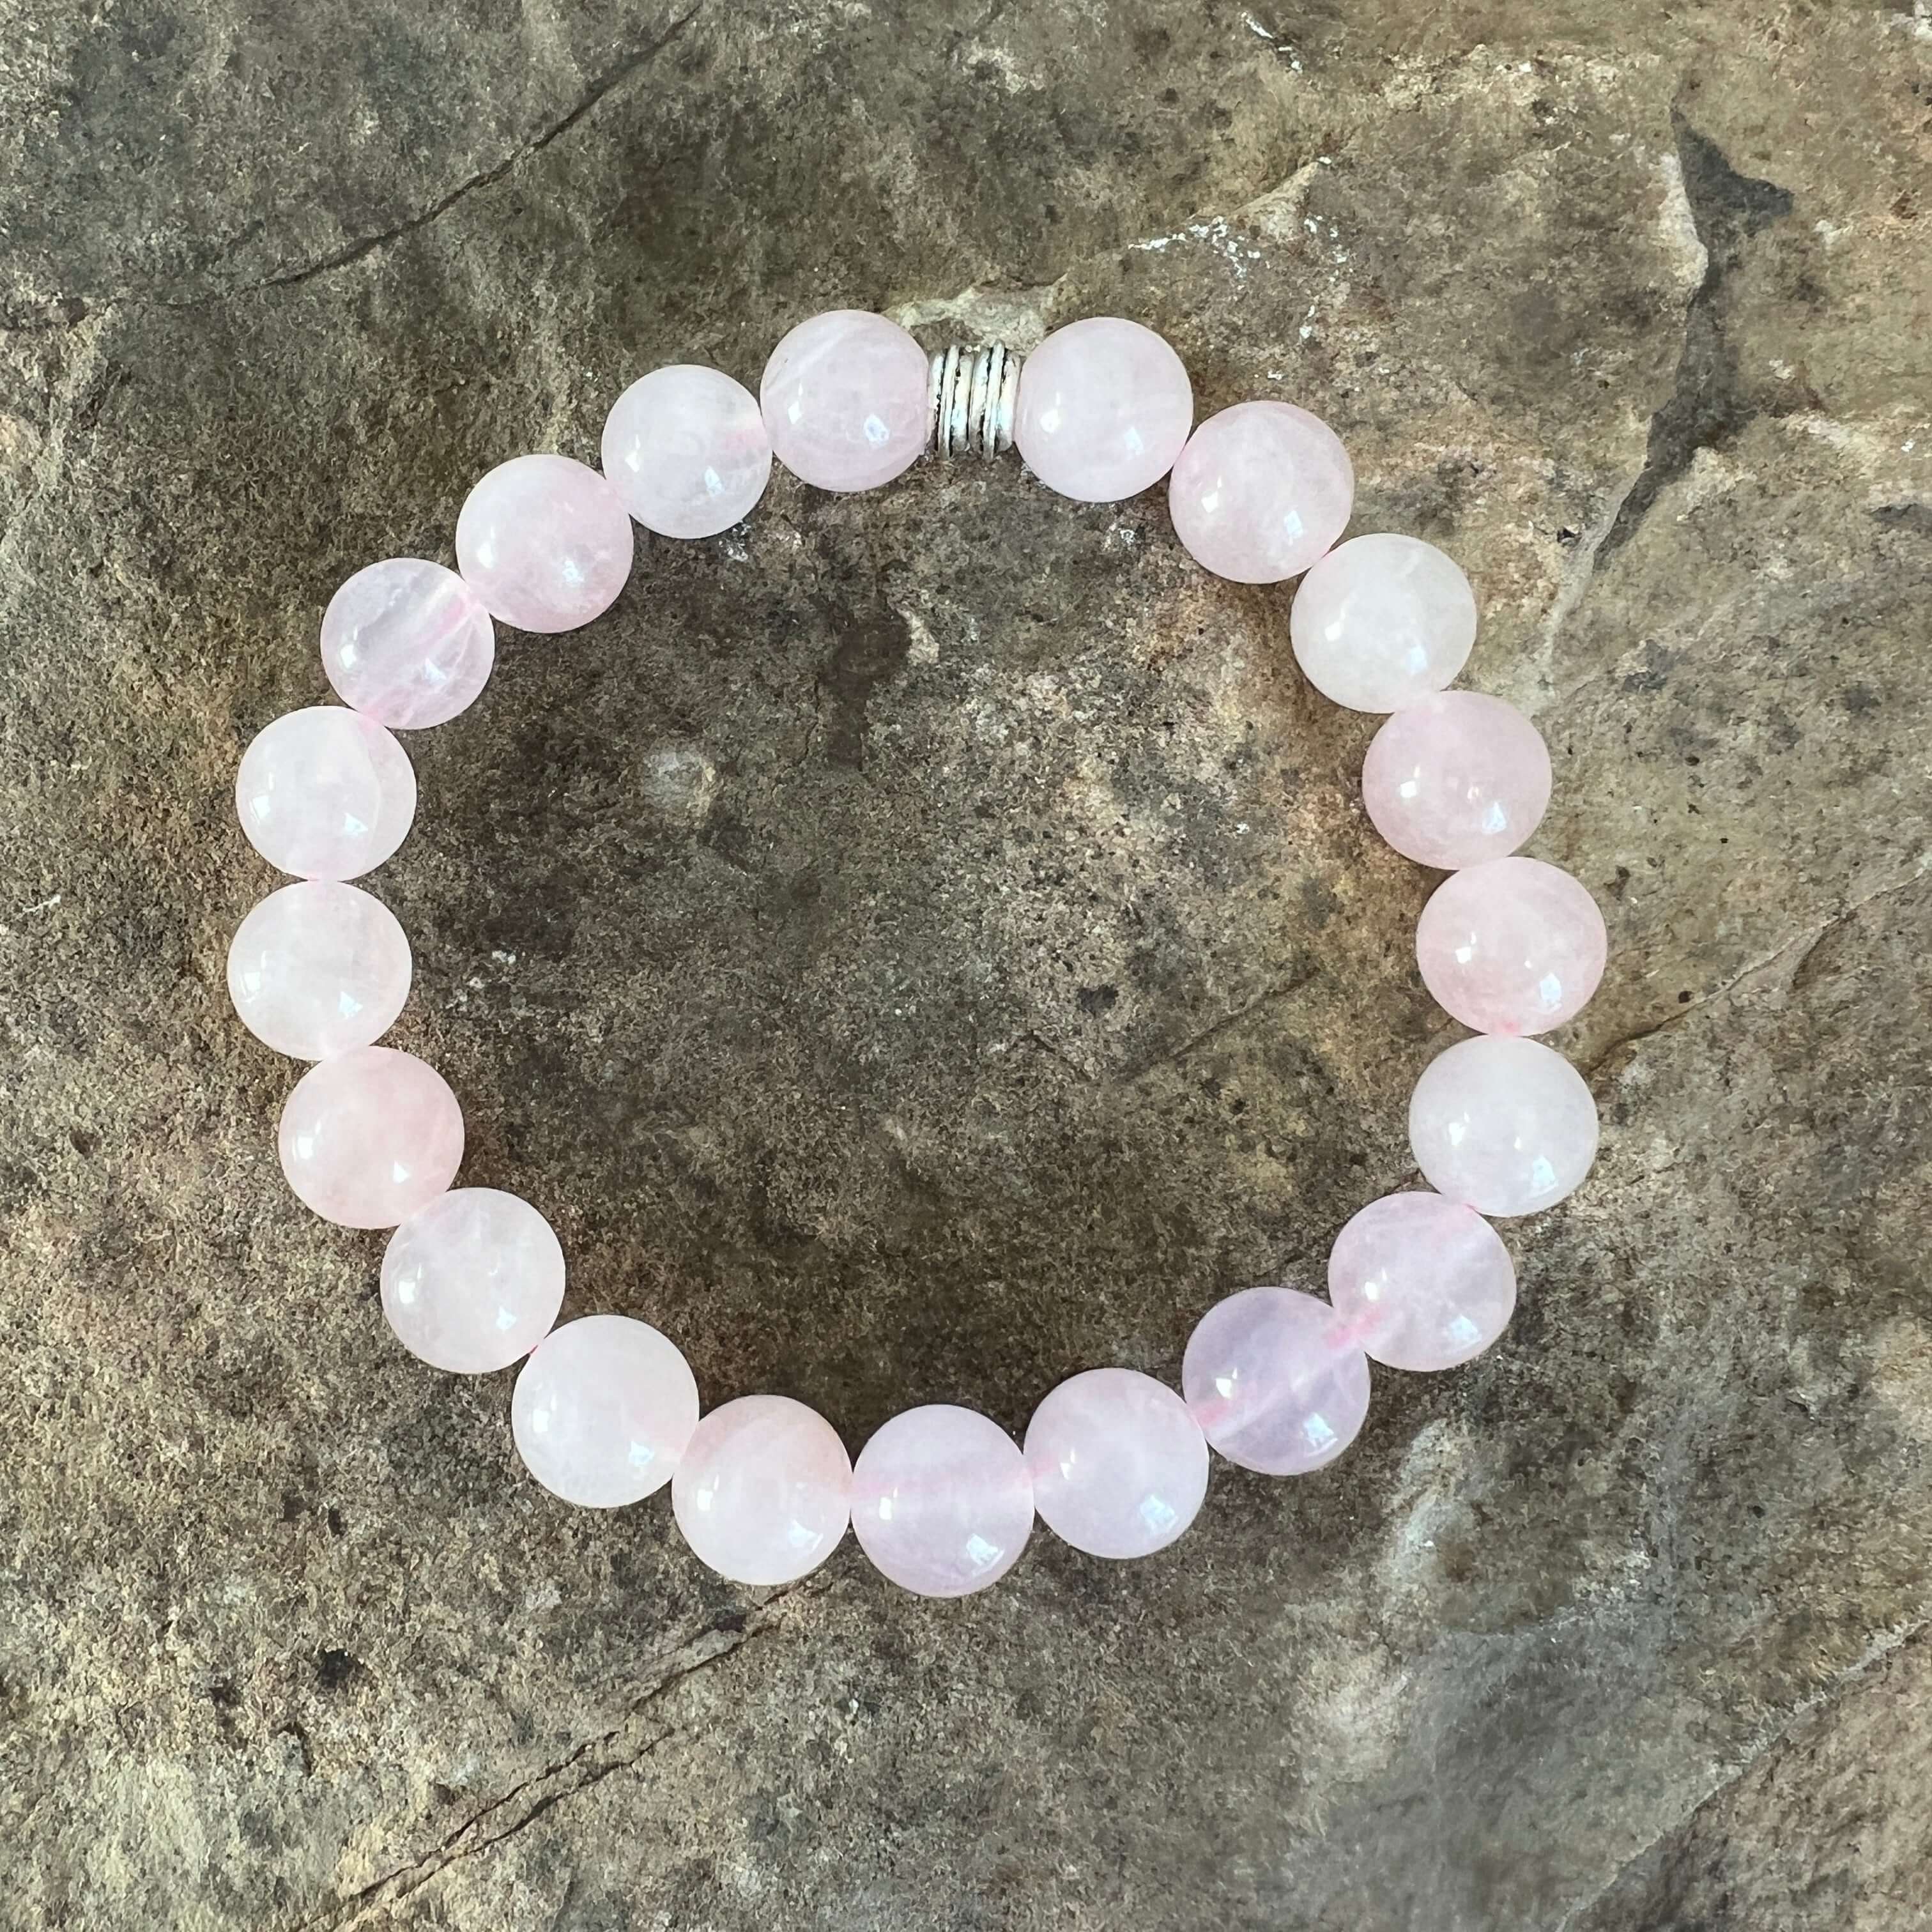 Rose Quartz Bead Bracelet This bracelet is made with high-quality Rose Quartz gemstones which bring love and purification to the wearer. Zodiac Sign: Taurus. Chakra: Heart. Handmade with authentic crystals & gemstones in Minneapolis, MN.